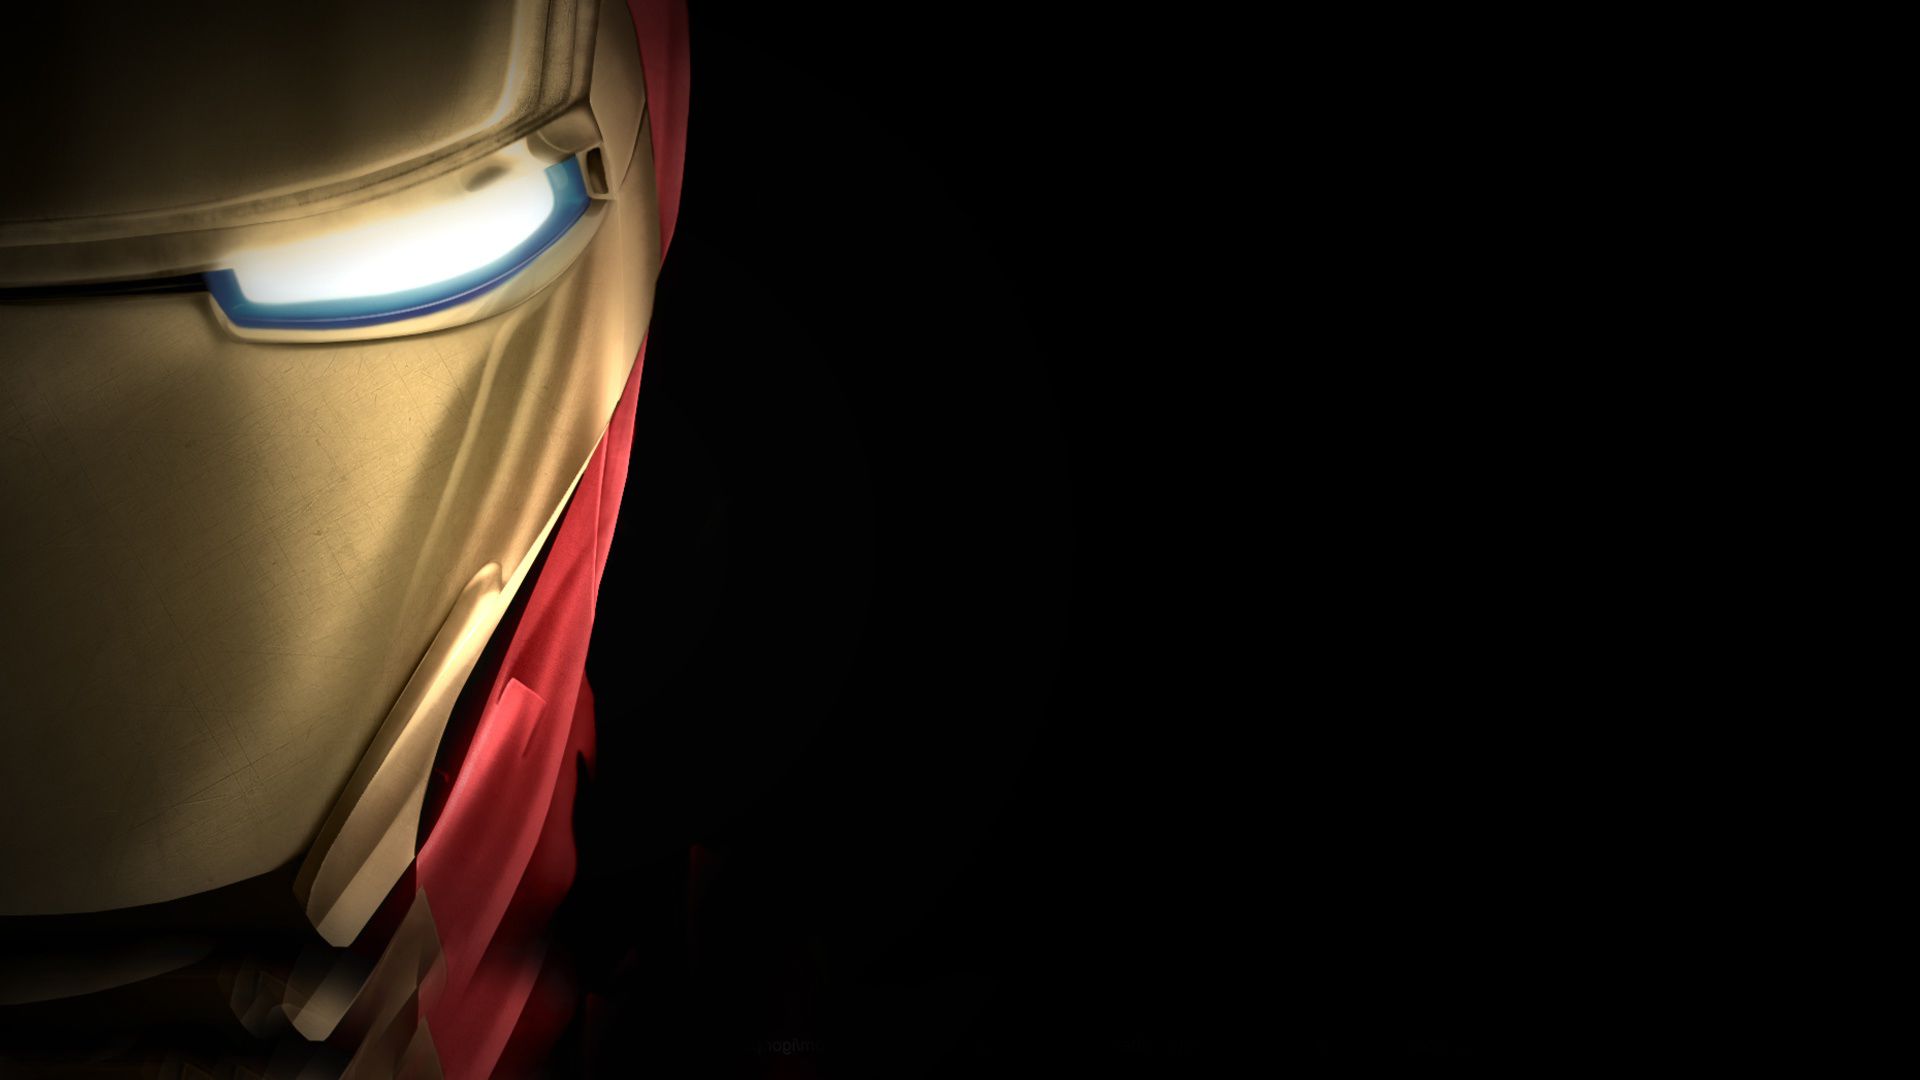 Ironman Hd Hd Cover Wallpaper Download, Barry Lo - Iron Man Hd Wallpappers , HD Wallpaper & Backgrounds